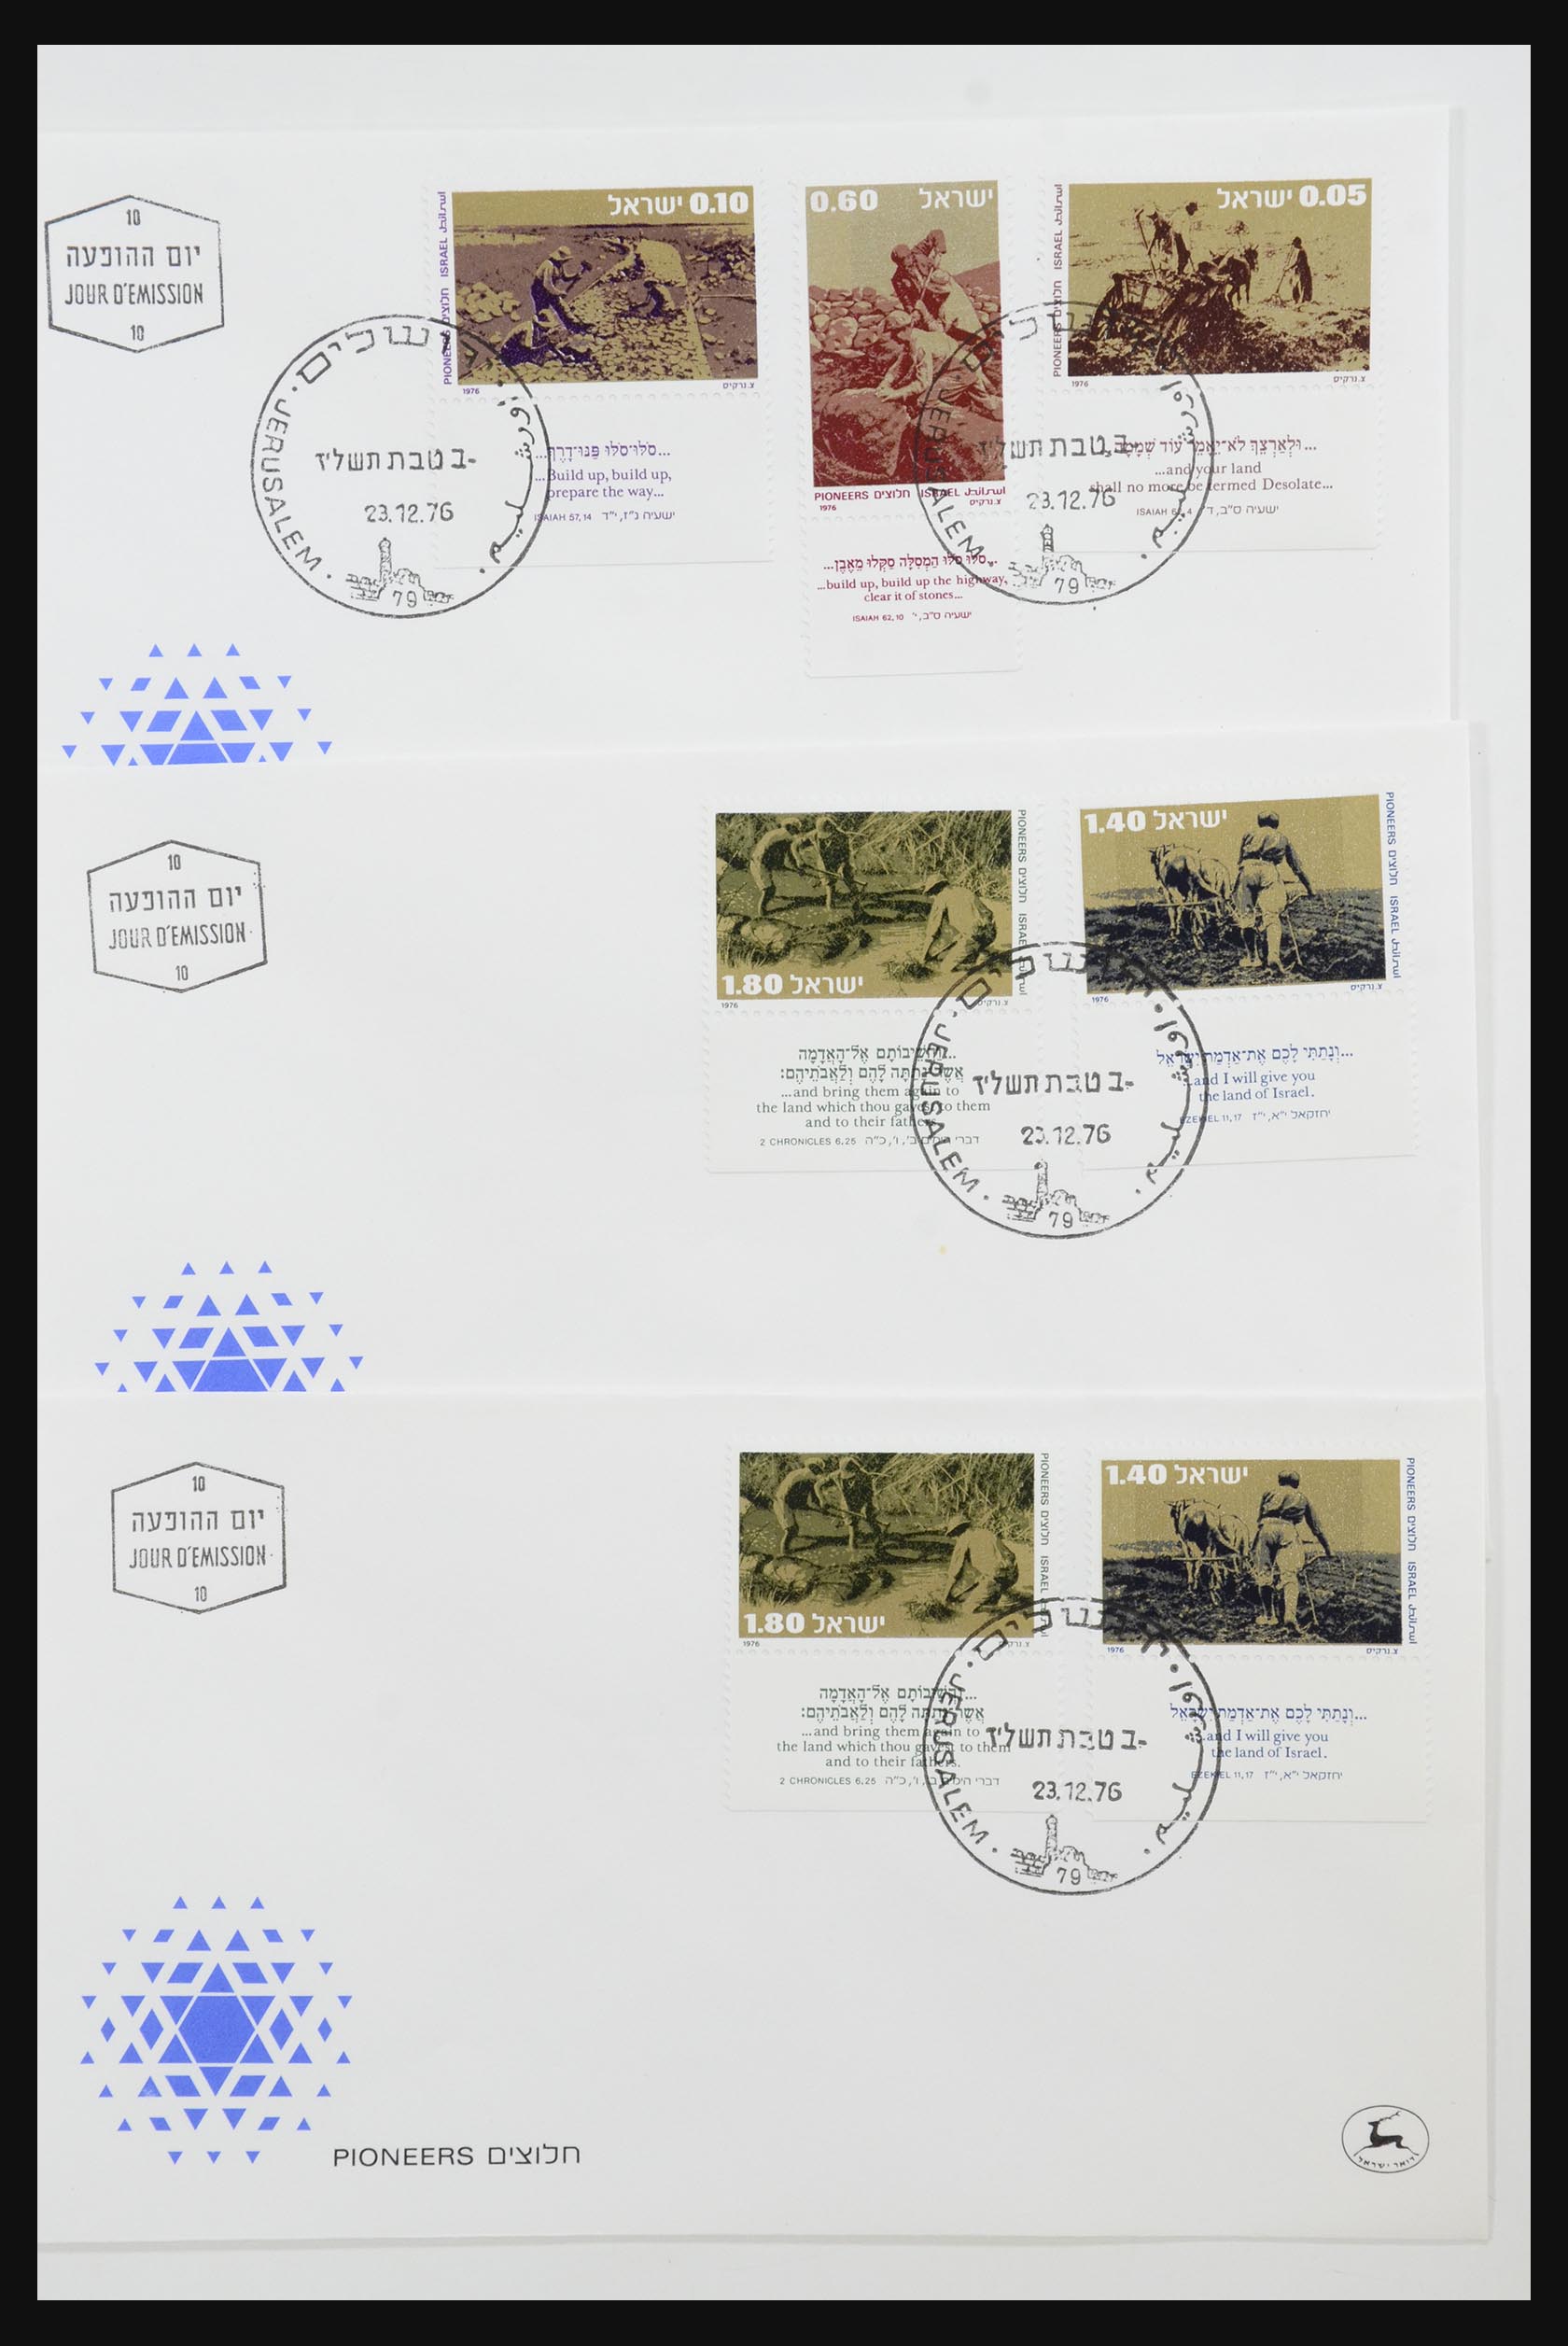 31924 003 - 31924 Israël fdc-collectie 1957-2003.